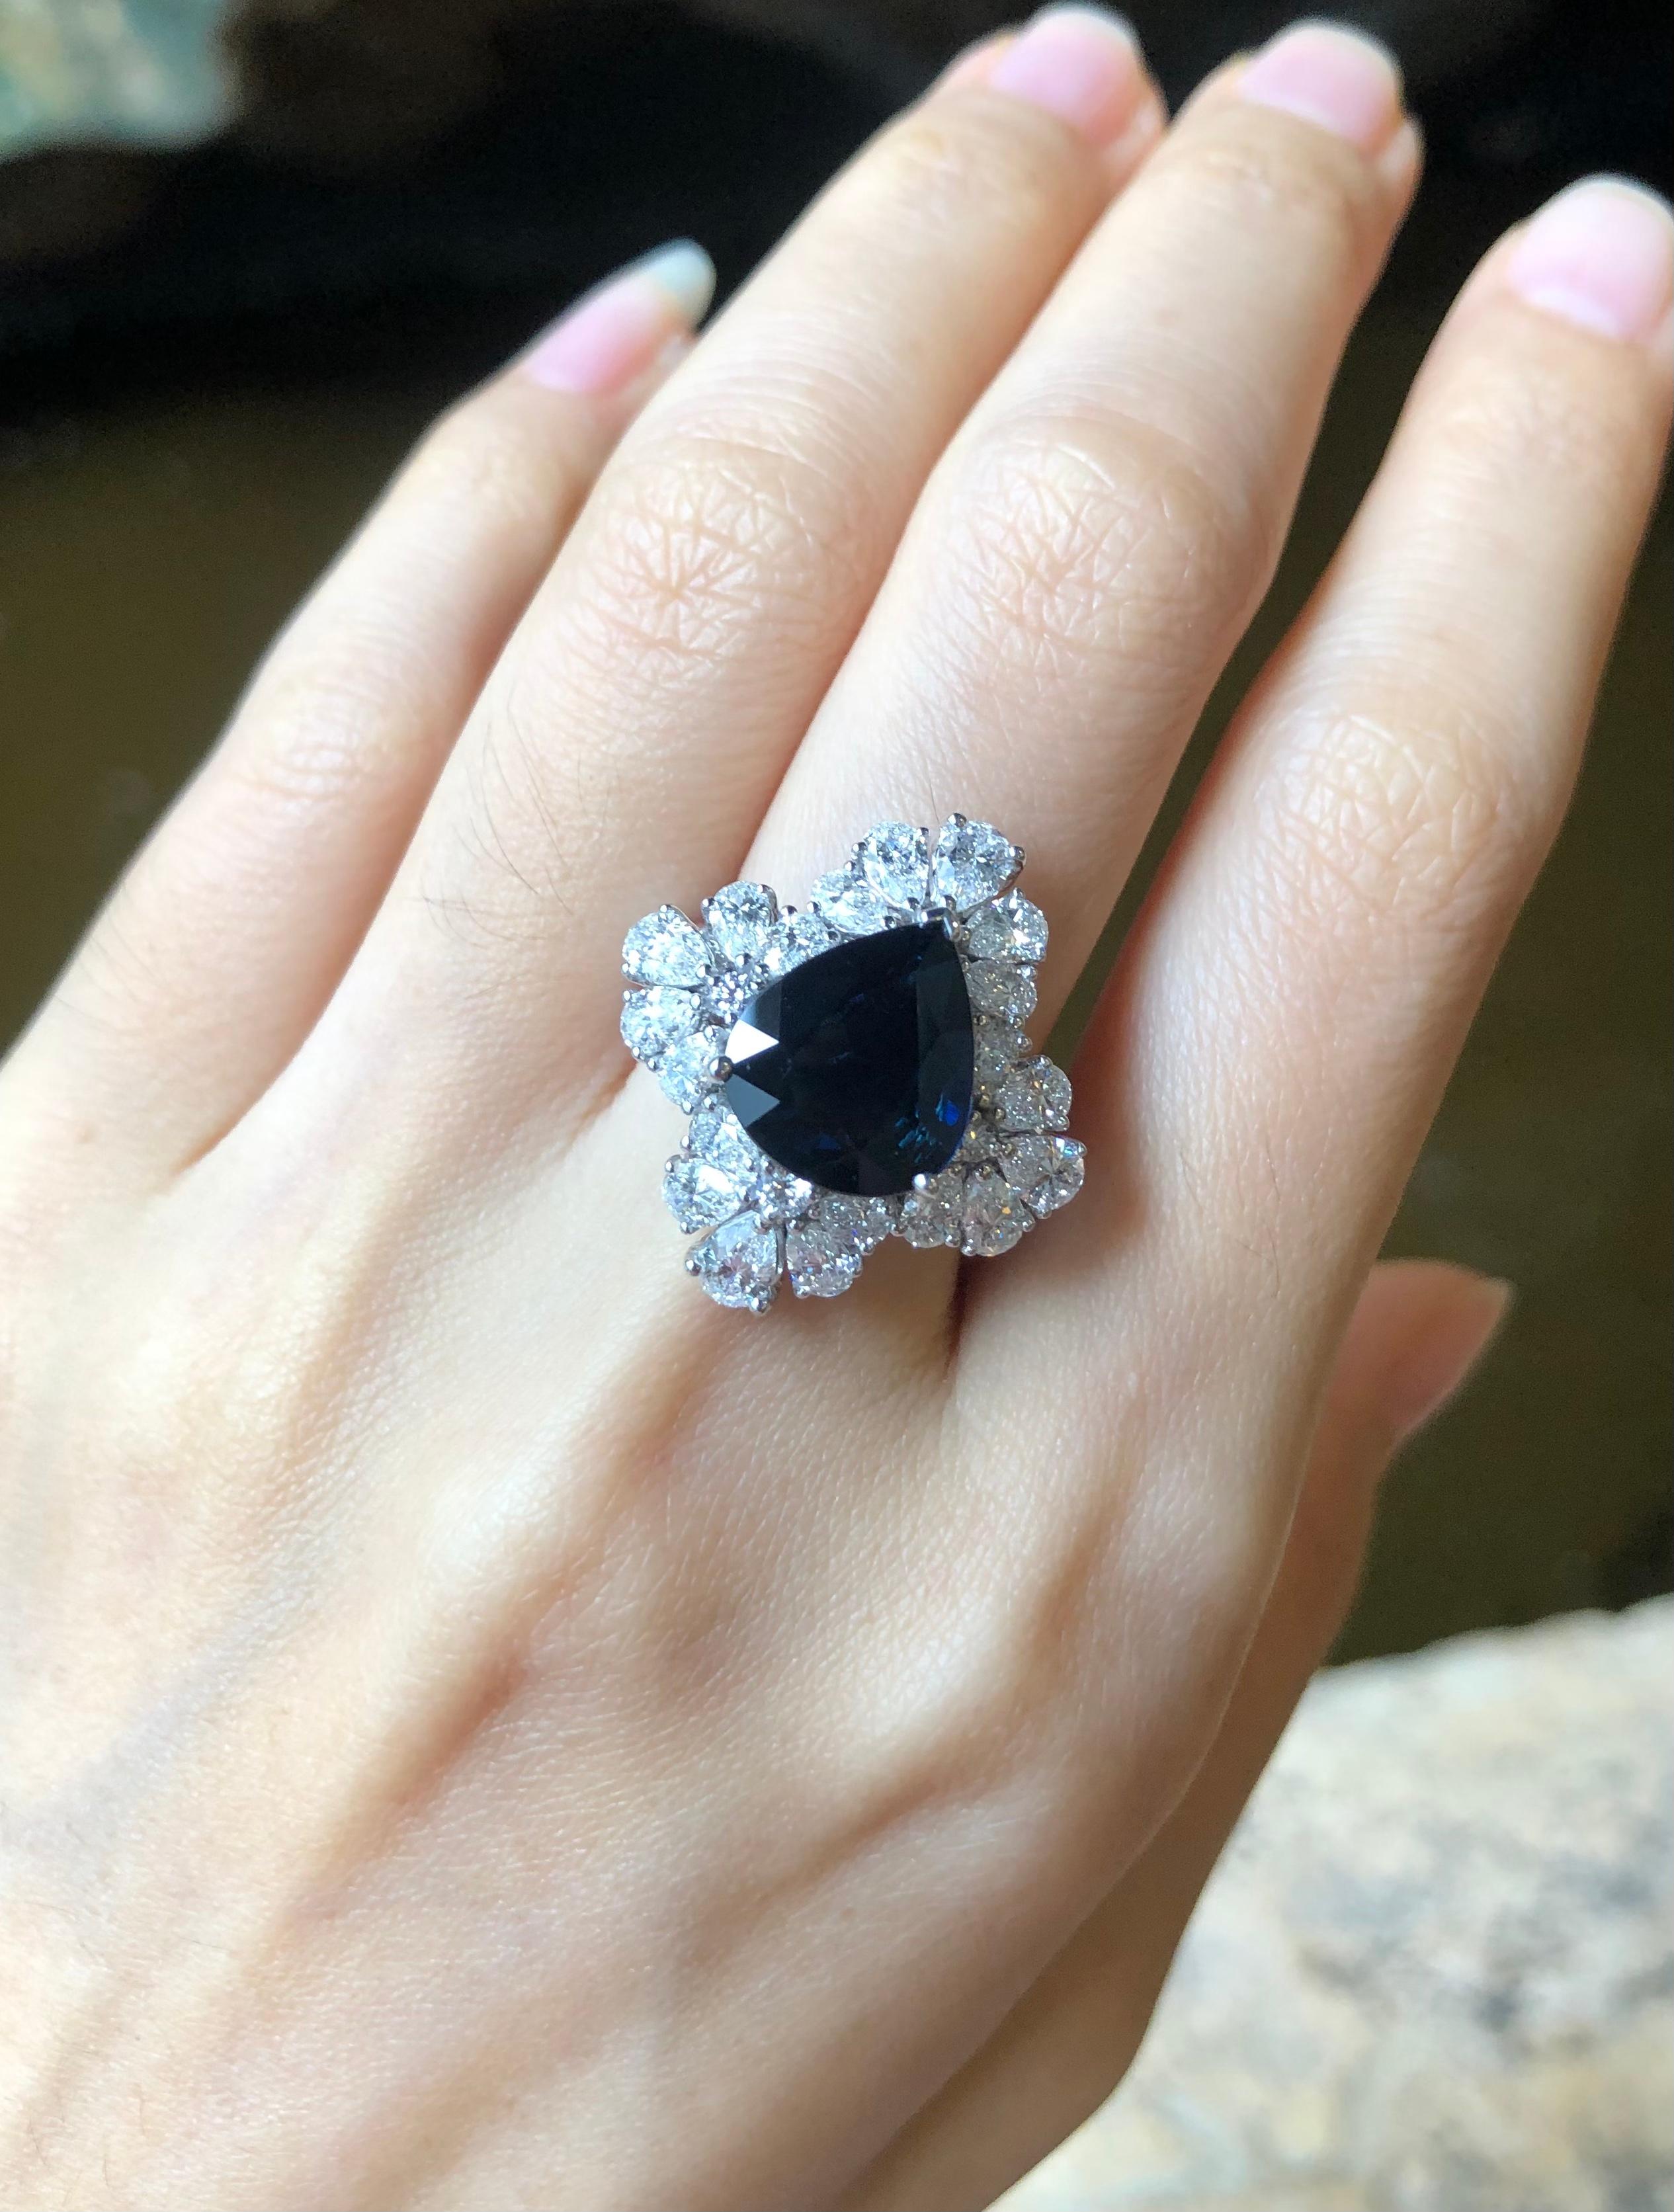 Blue Sapphire 4.63 carats with Diamond 1.46 carats Ring set in 18 Karat White Gold Settings

Width:  1.0 cm 
Length:  1.2 cm
Ring Size: 53
Total Weight: 9.1 grams

